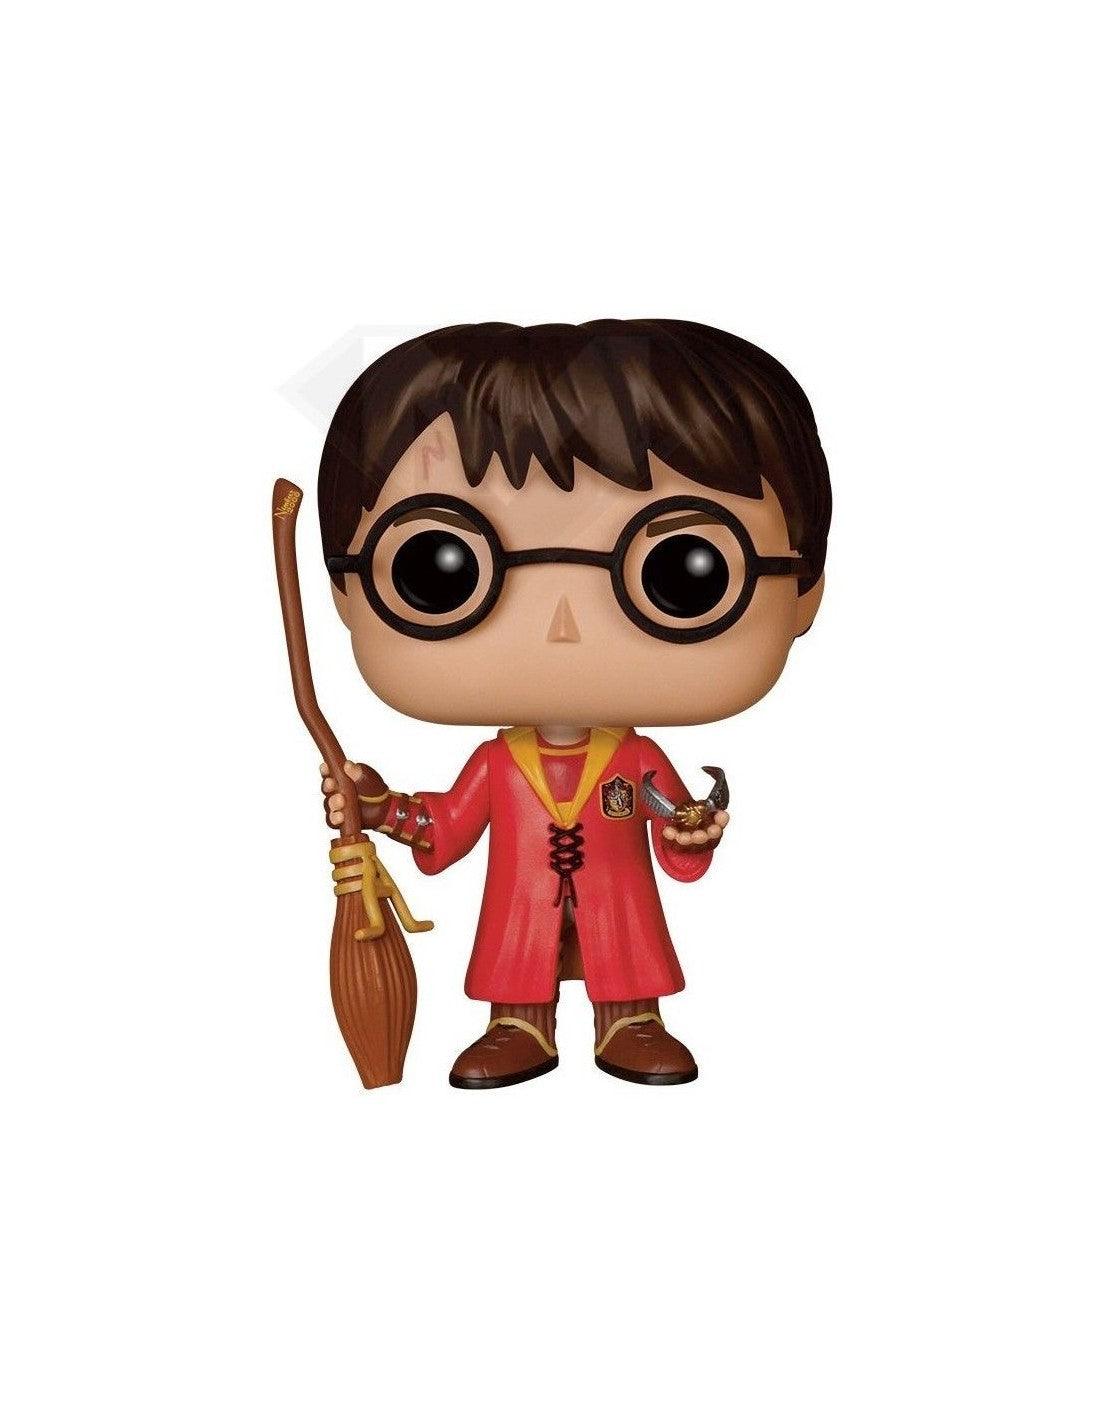 Harry Potter: Funko Pop! Movies: Harry Potter Gryffindor Quidditch #08 - Magic Dreams Store